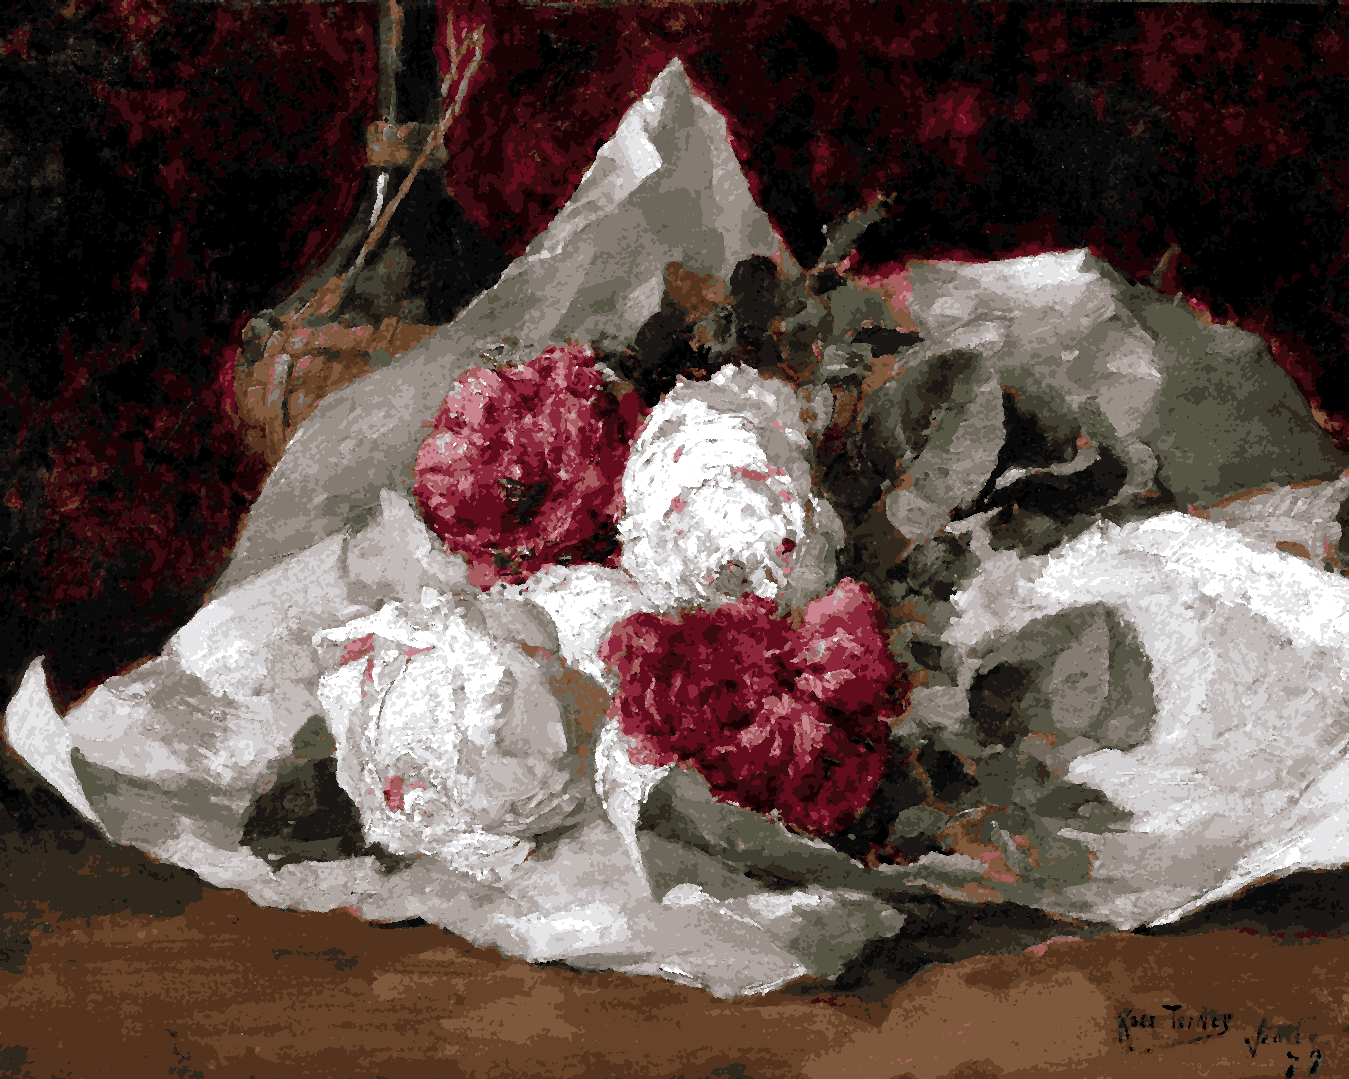 Bouquet of Roses by Ross Sterling Turner - Van-Go Paint-By-Number Kit